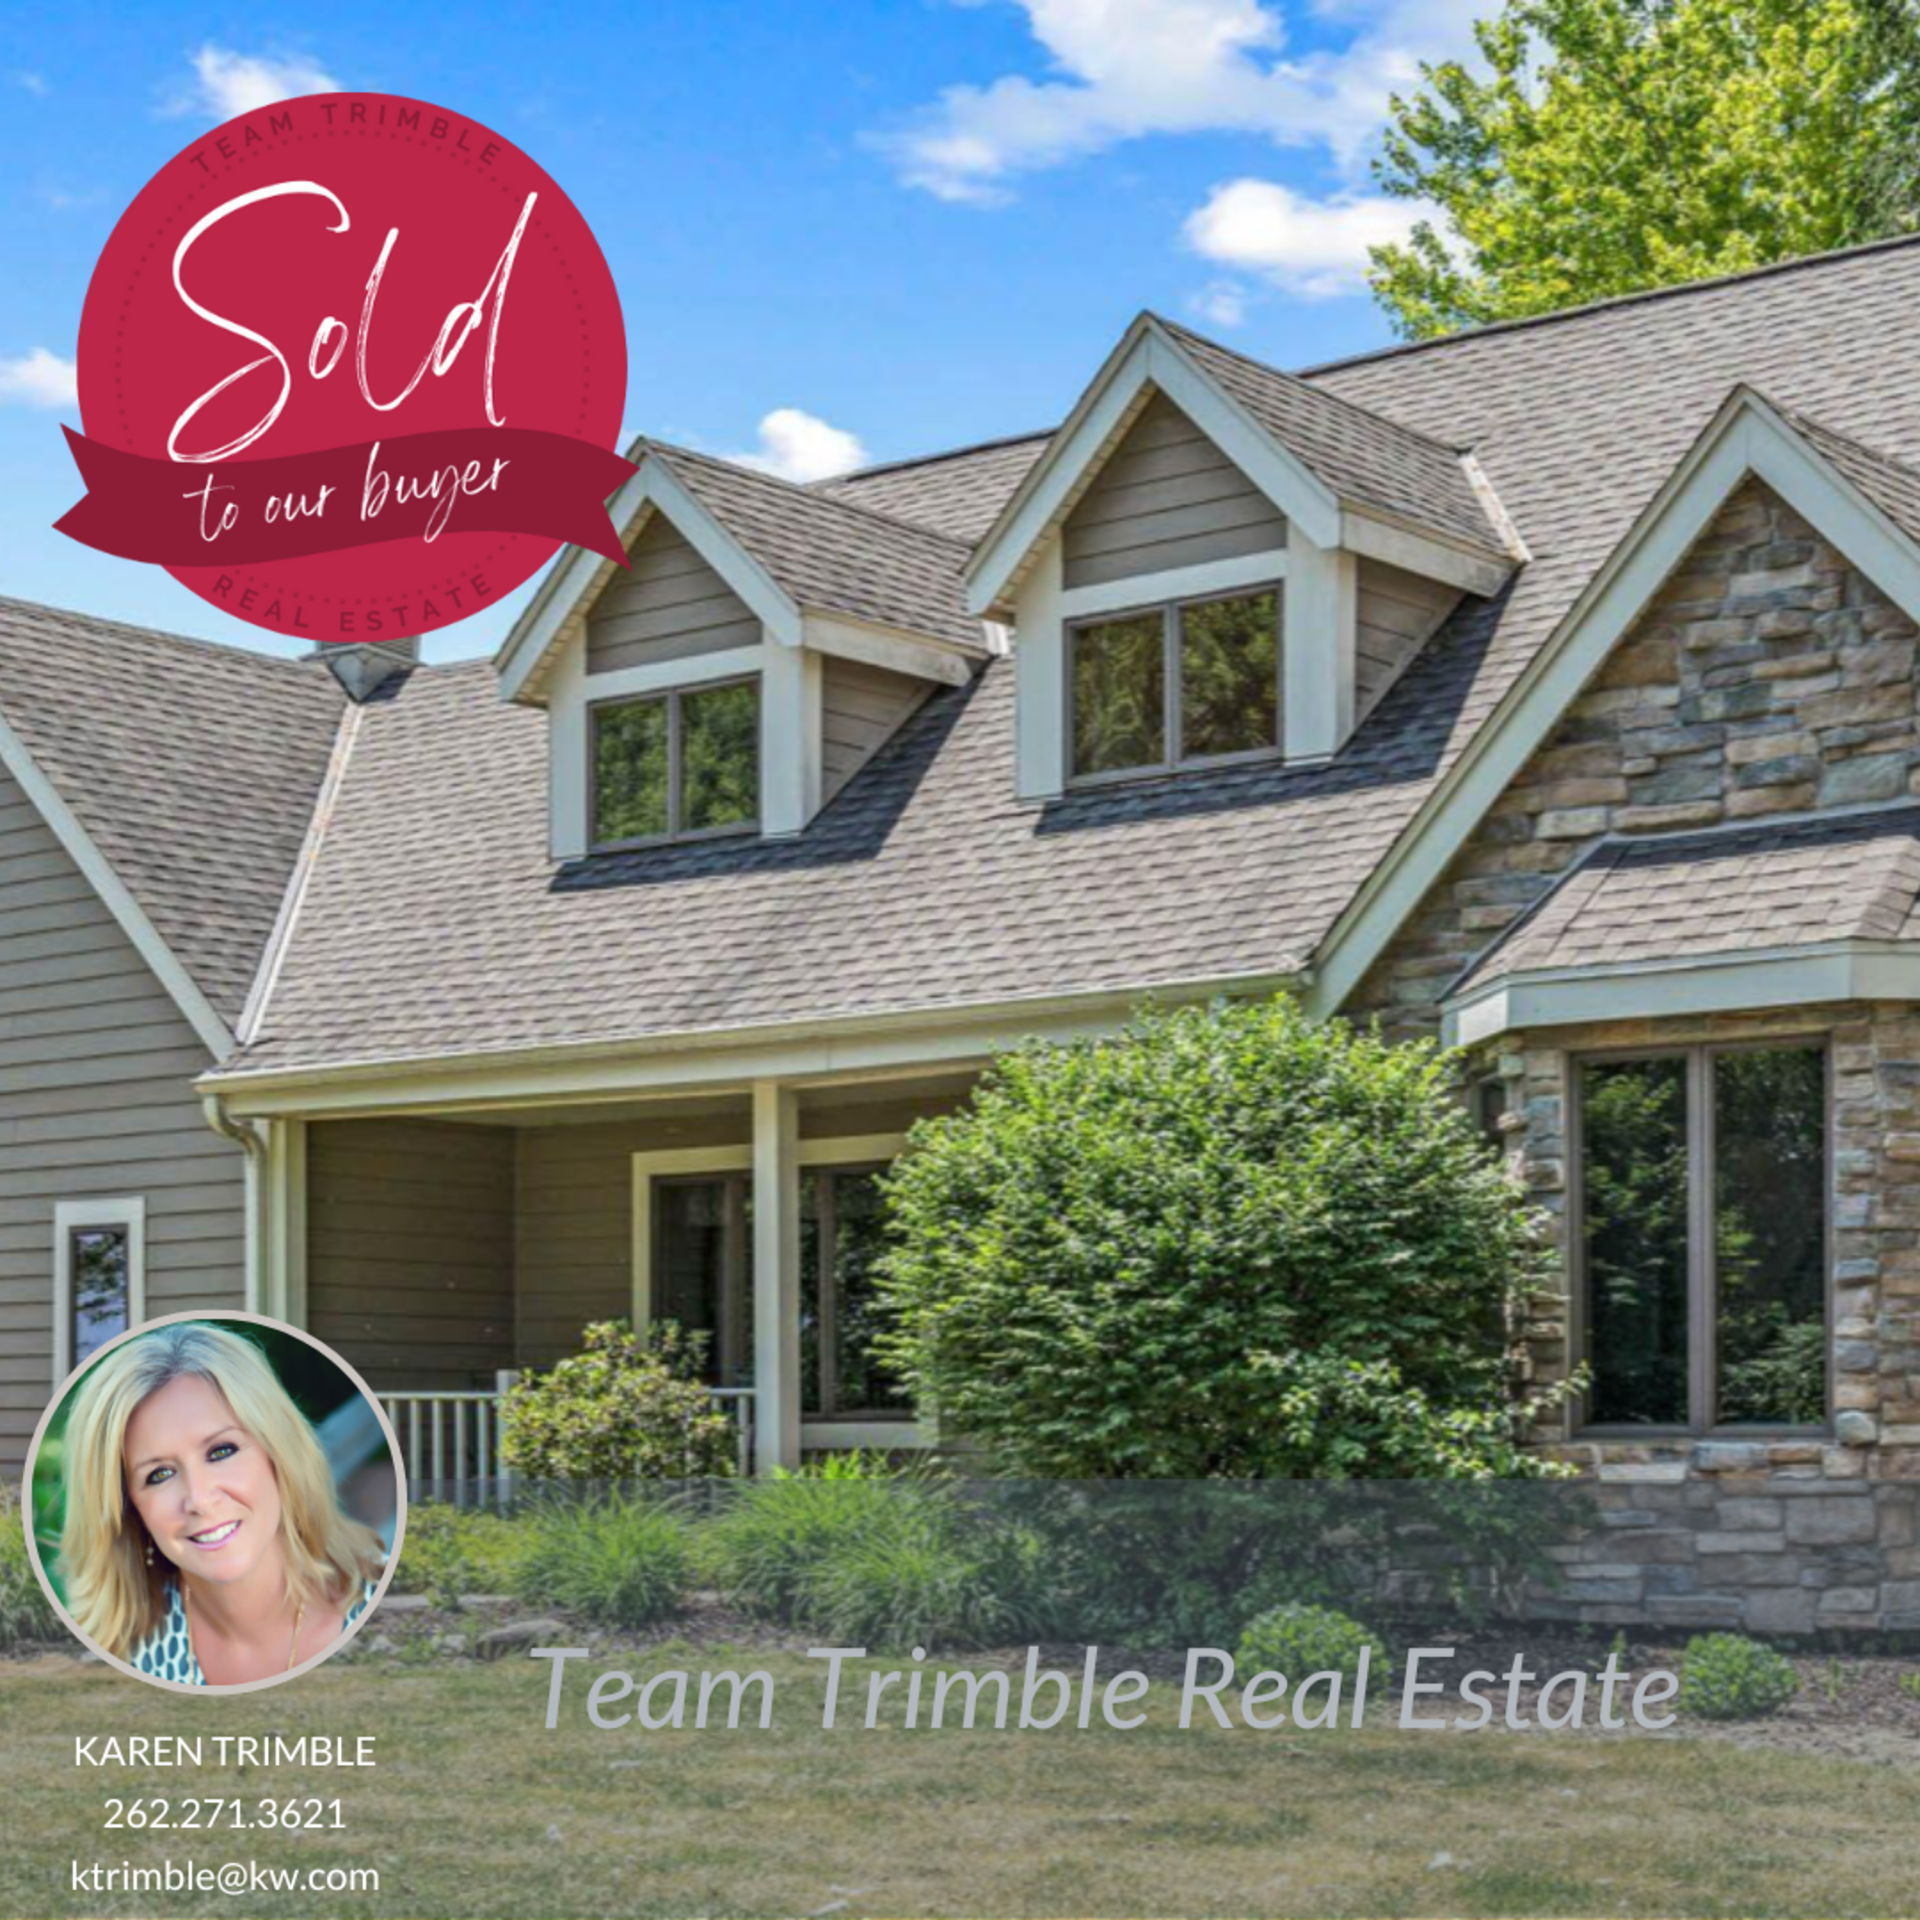 Just Sold To Our Buyer. 11301 Granville Rd Mequon, WI